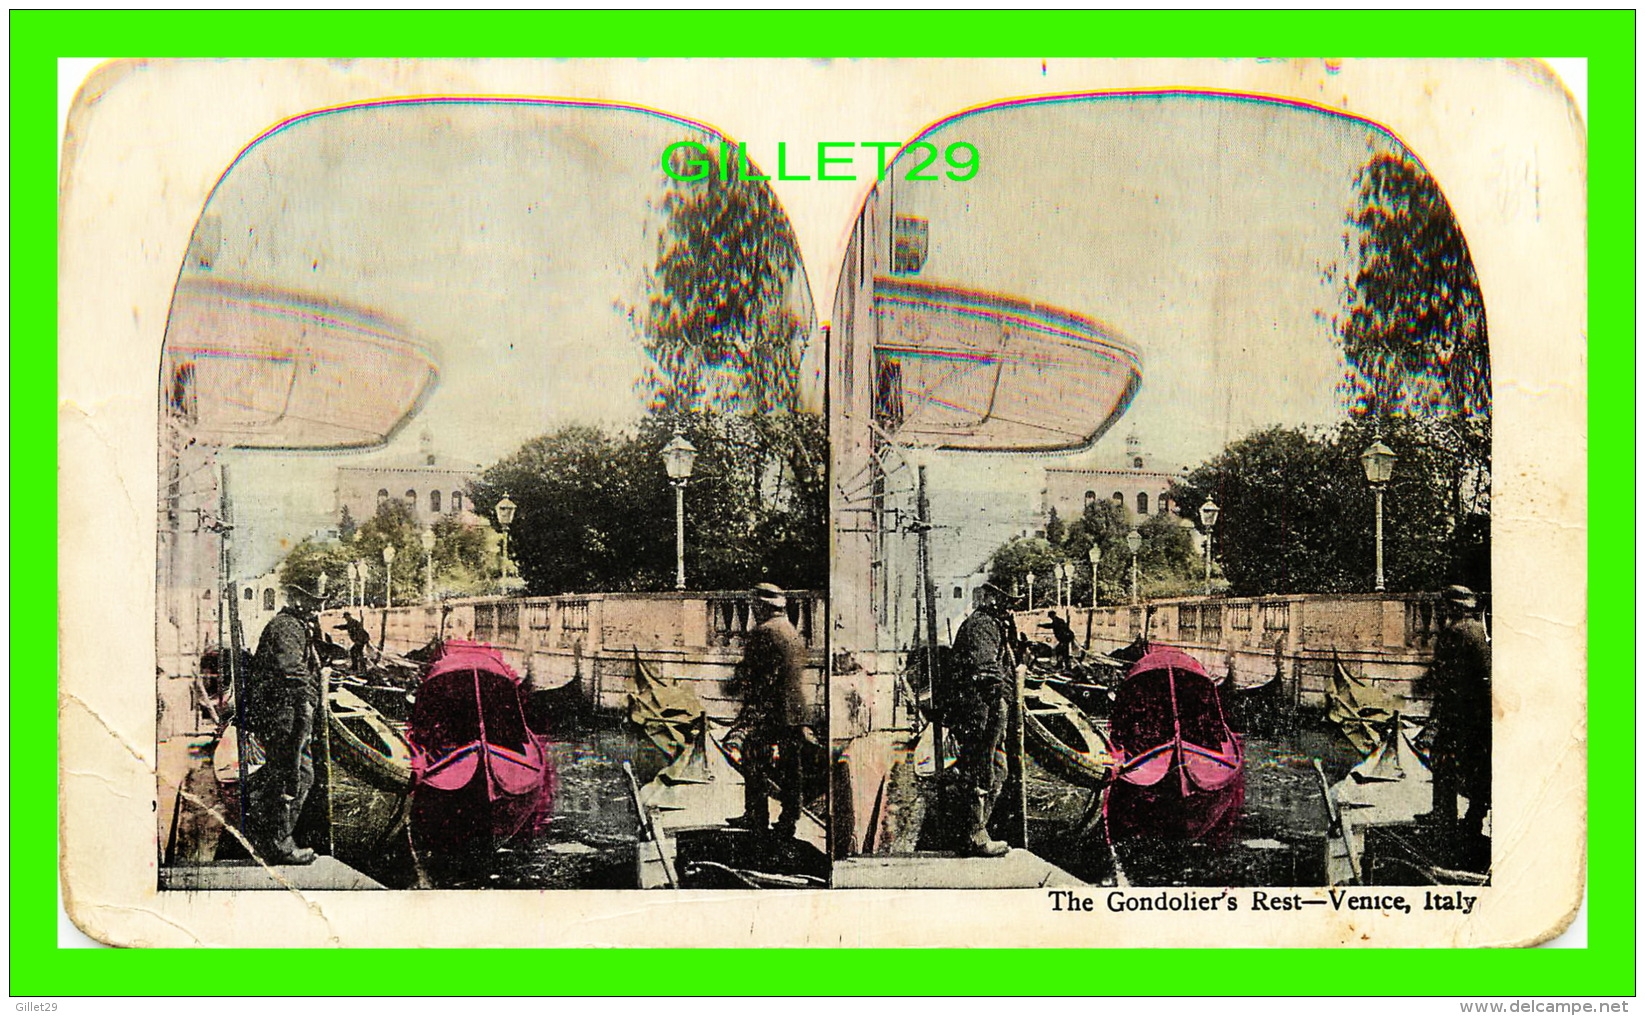 CARTES  STÉRÉOSCOPIQUES - THE GONDOLIER'S REST, VENICE, ITALY - ANIMATED - - Stereoscope Cards